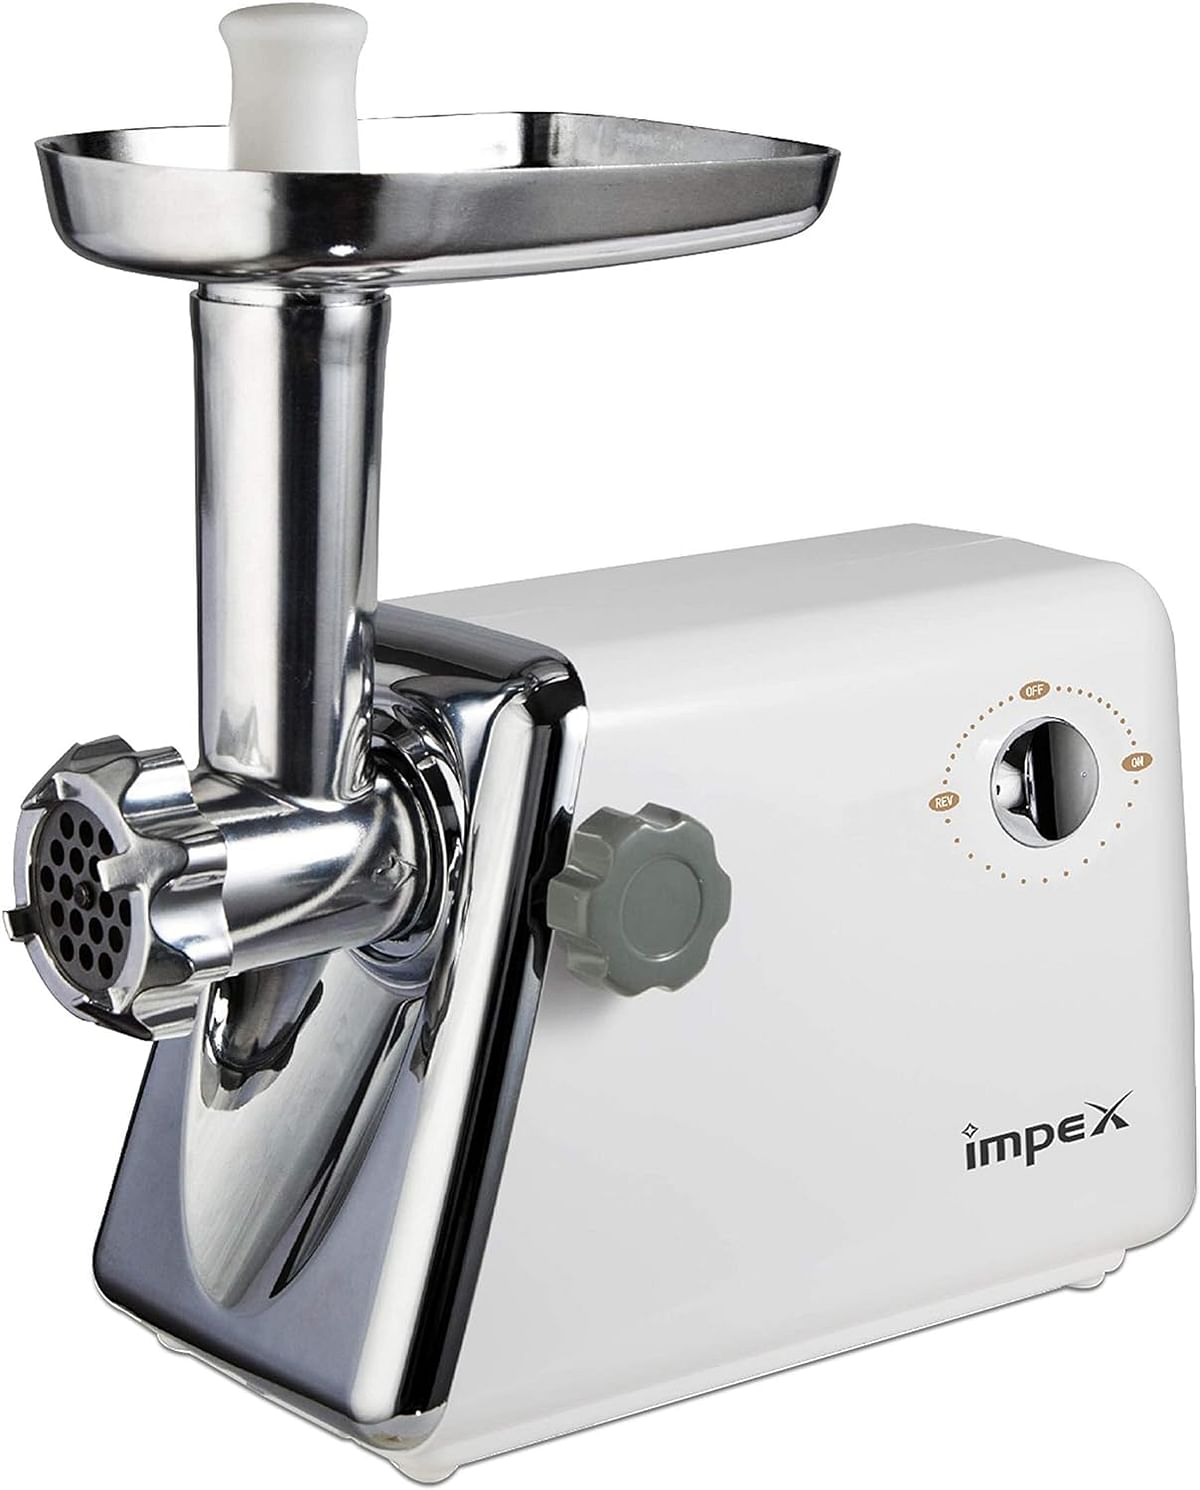 Impex Turbo Power Meat Grinder 1800.0 W MG 3801 White/Silver